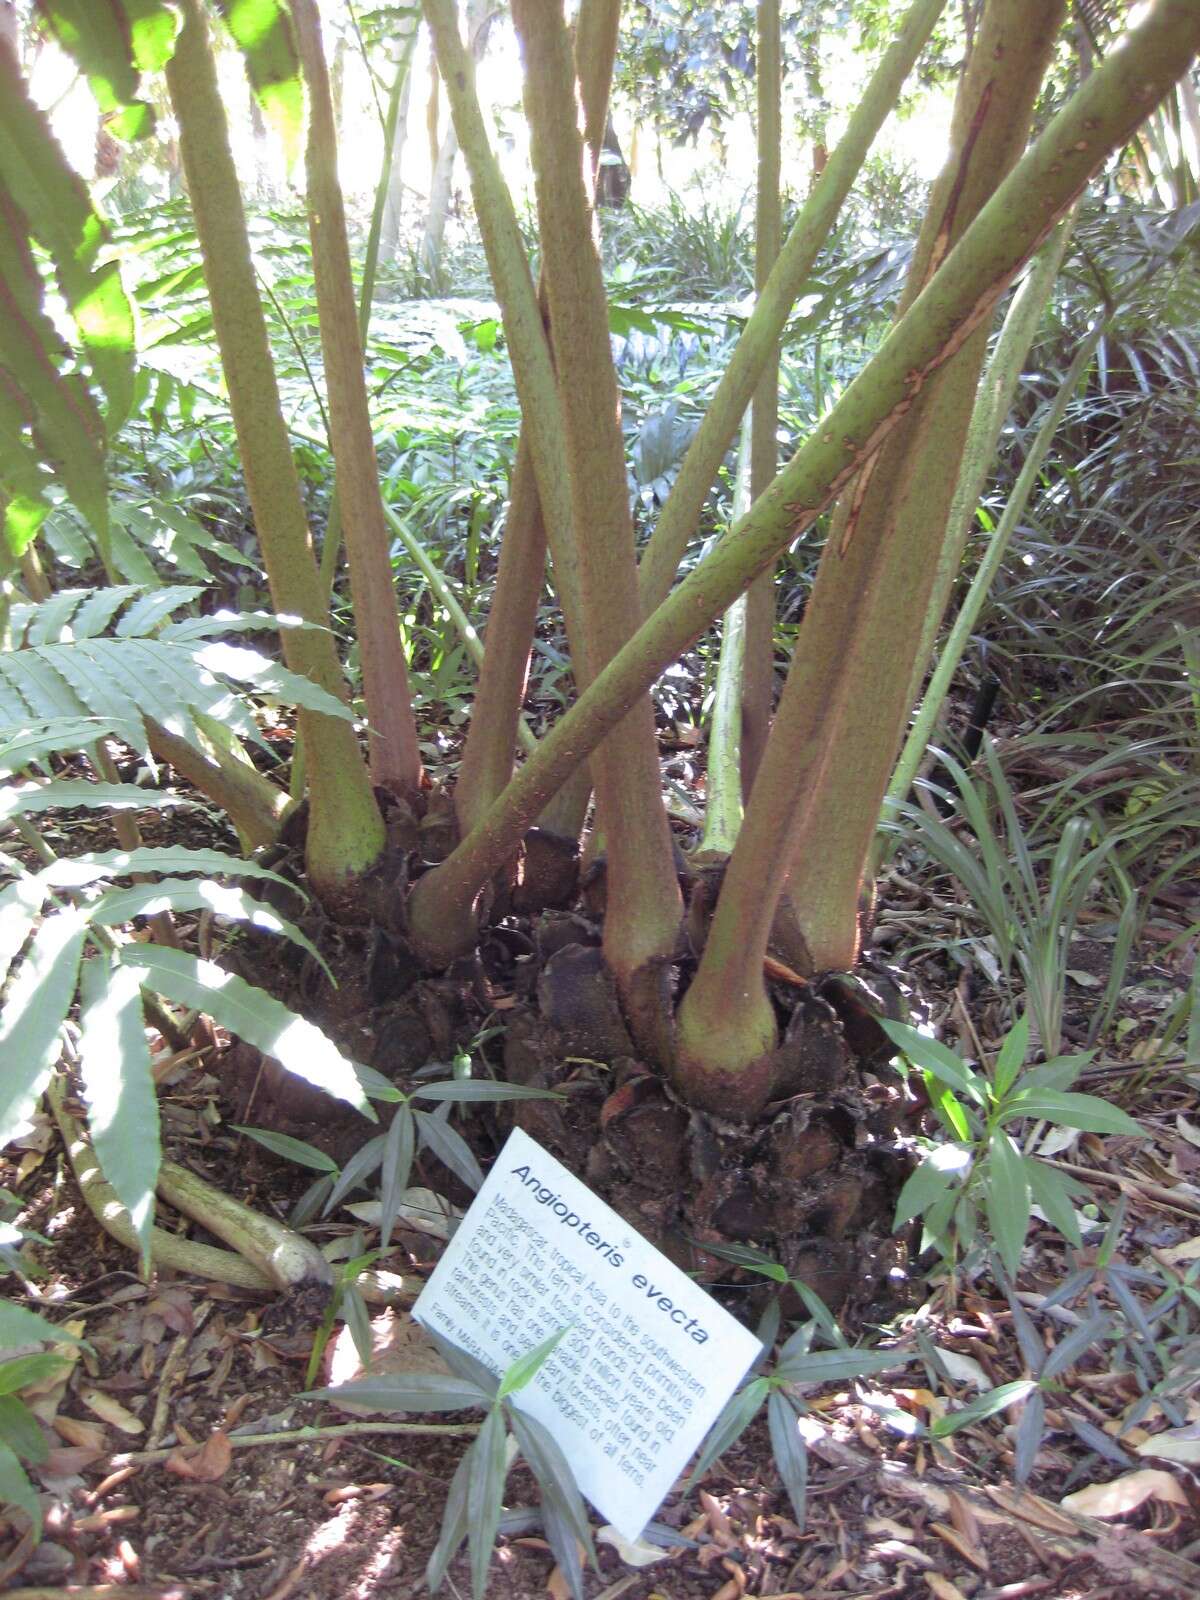 Image of angiopteris fern